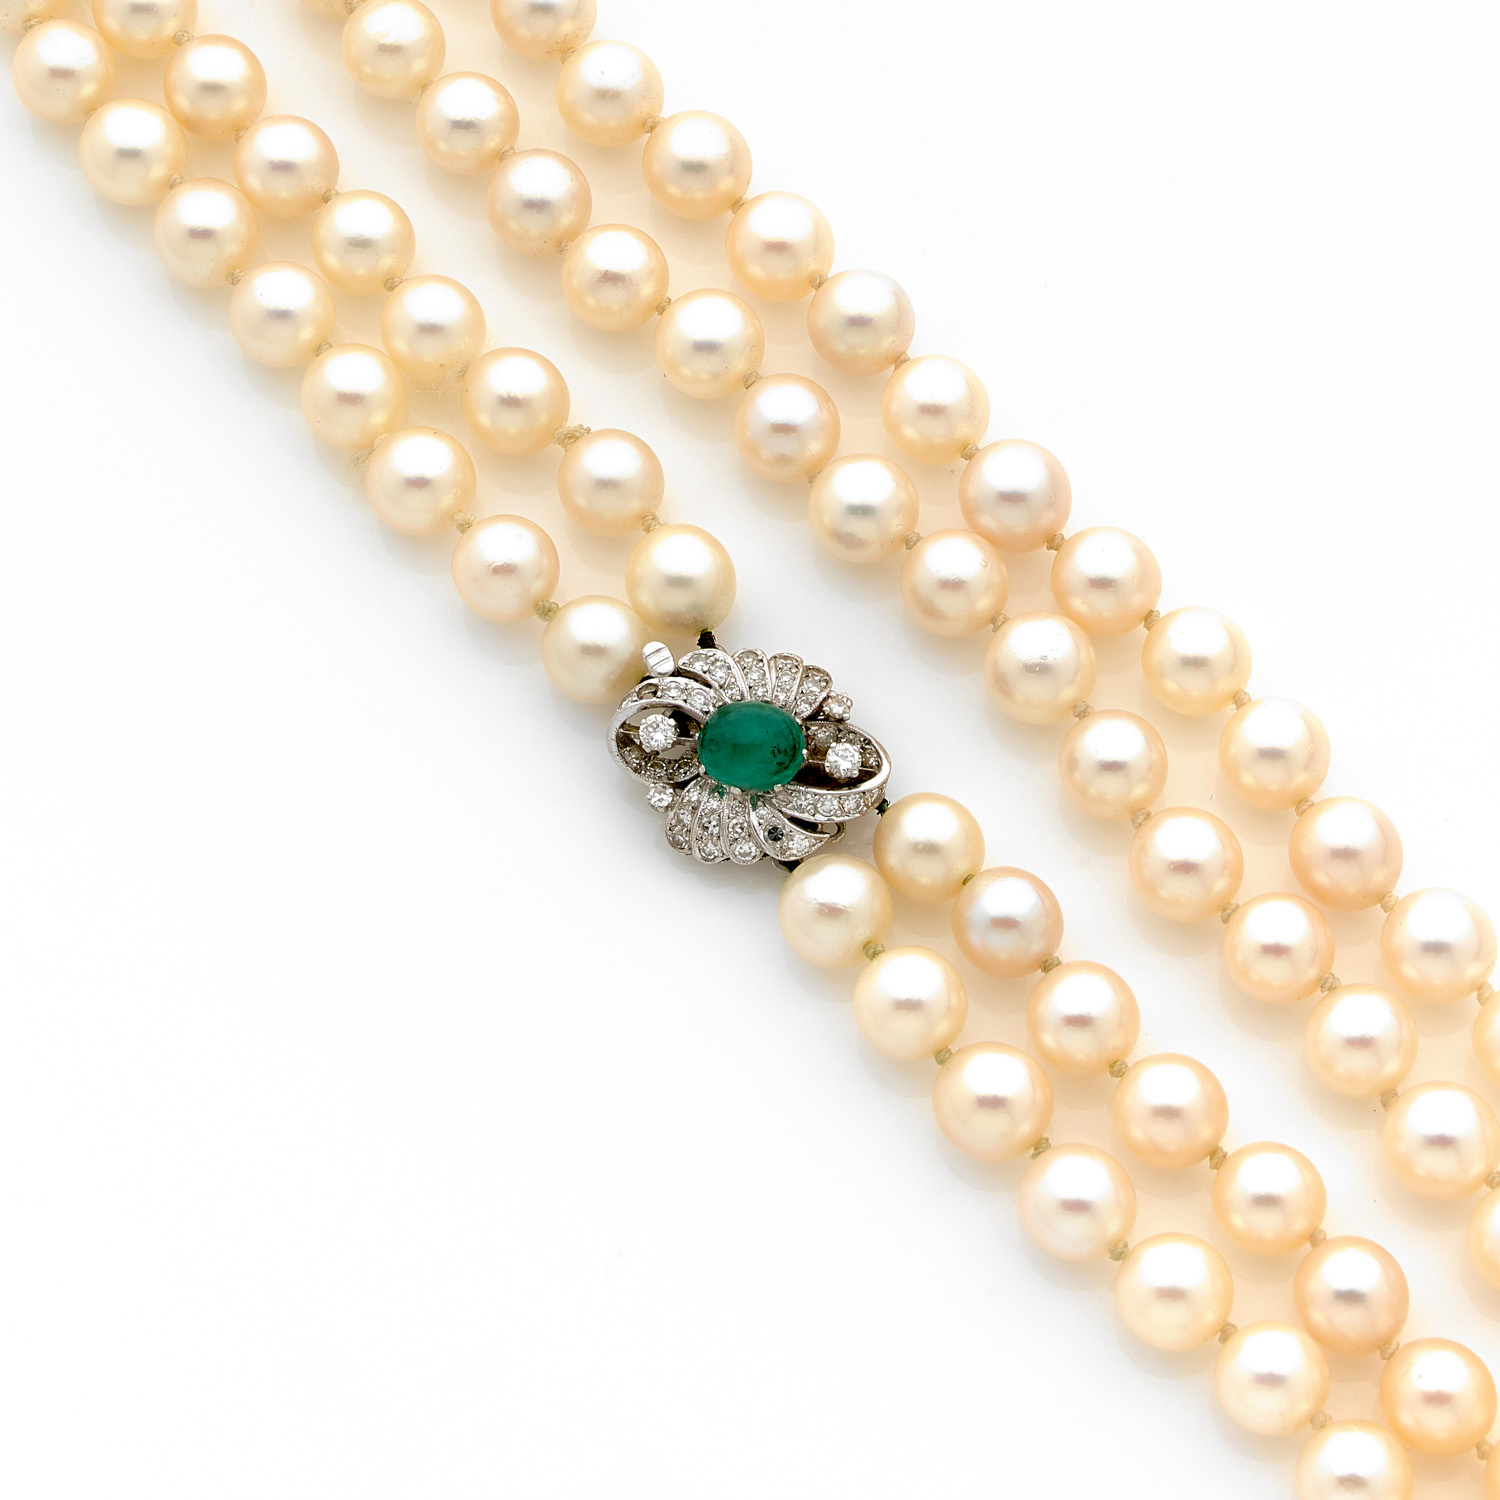 Lot - Double Strand Pearl Necklace with Platinum, Emerald, and Diamond Clasp